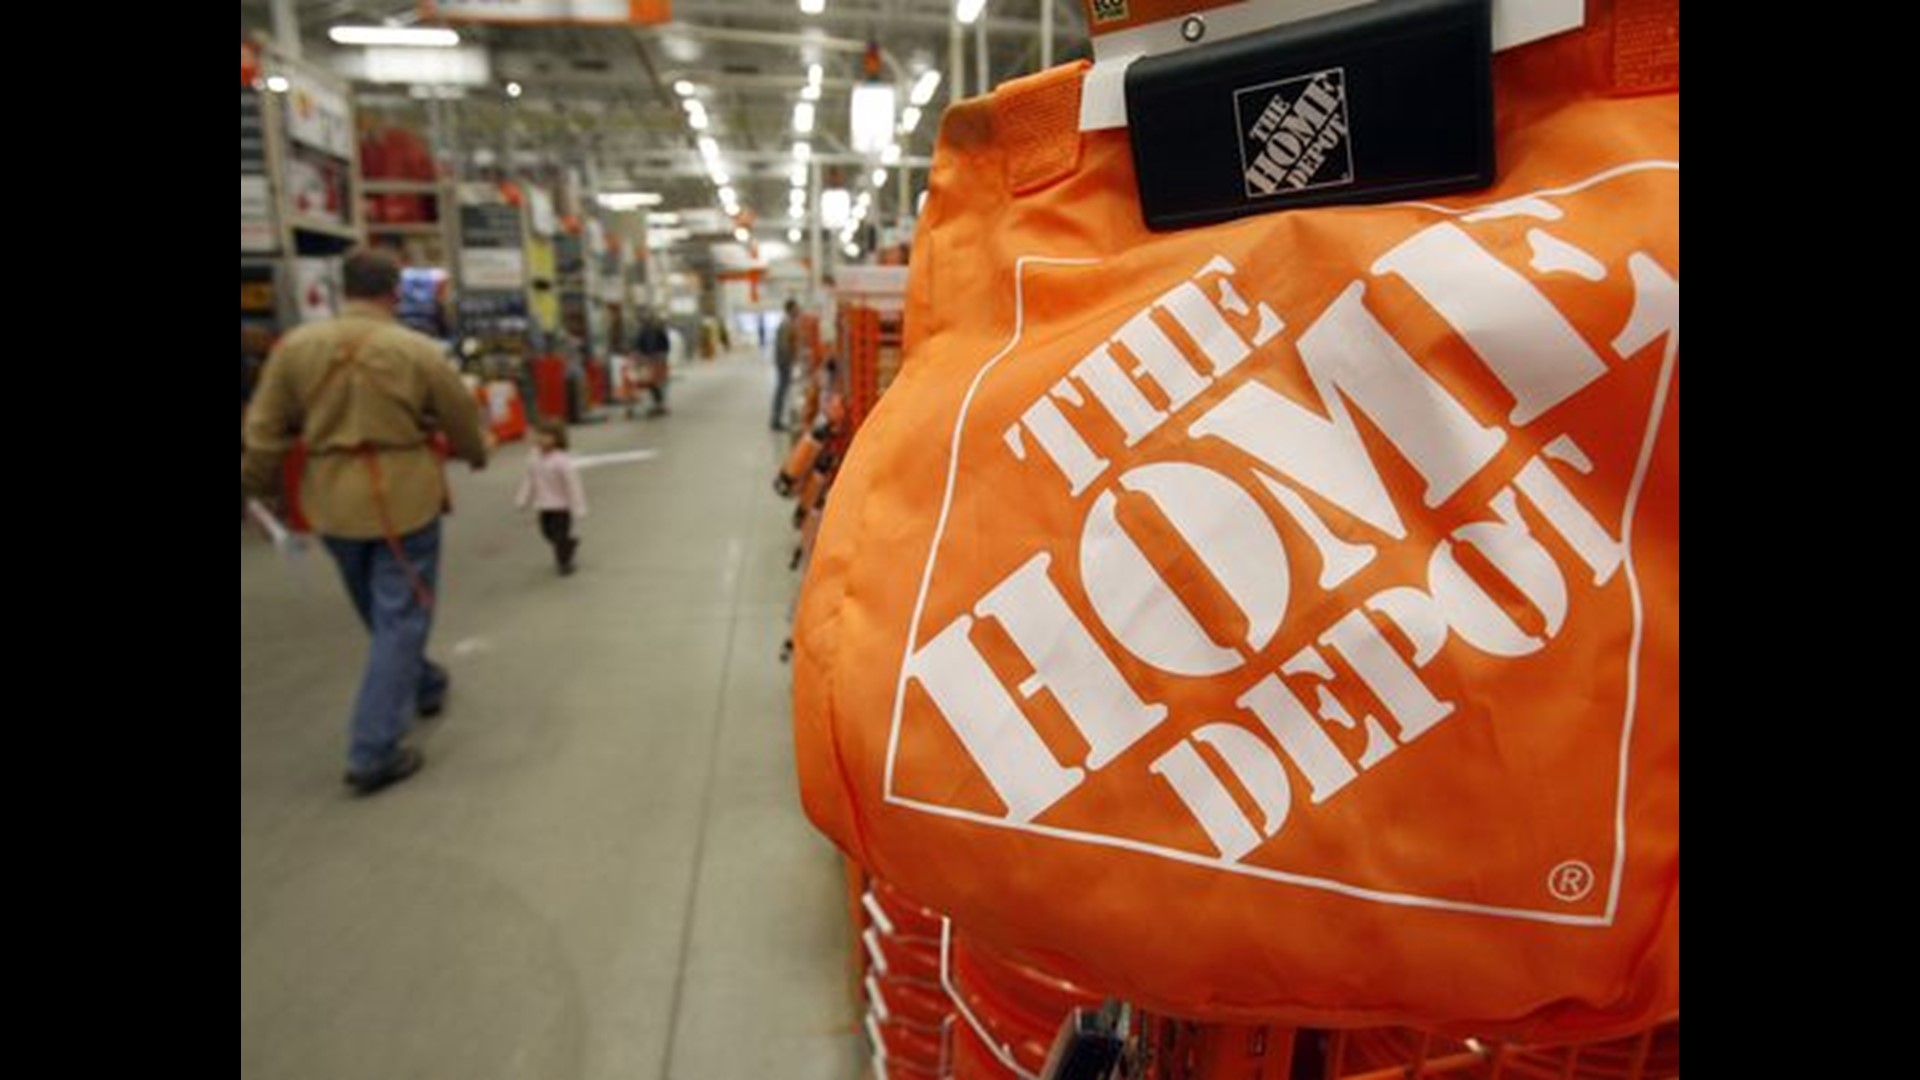 Report: Home Depot continued to sell recalled products to consumers